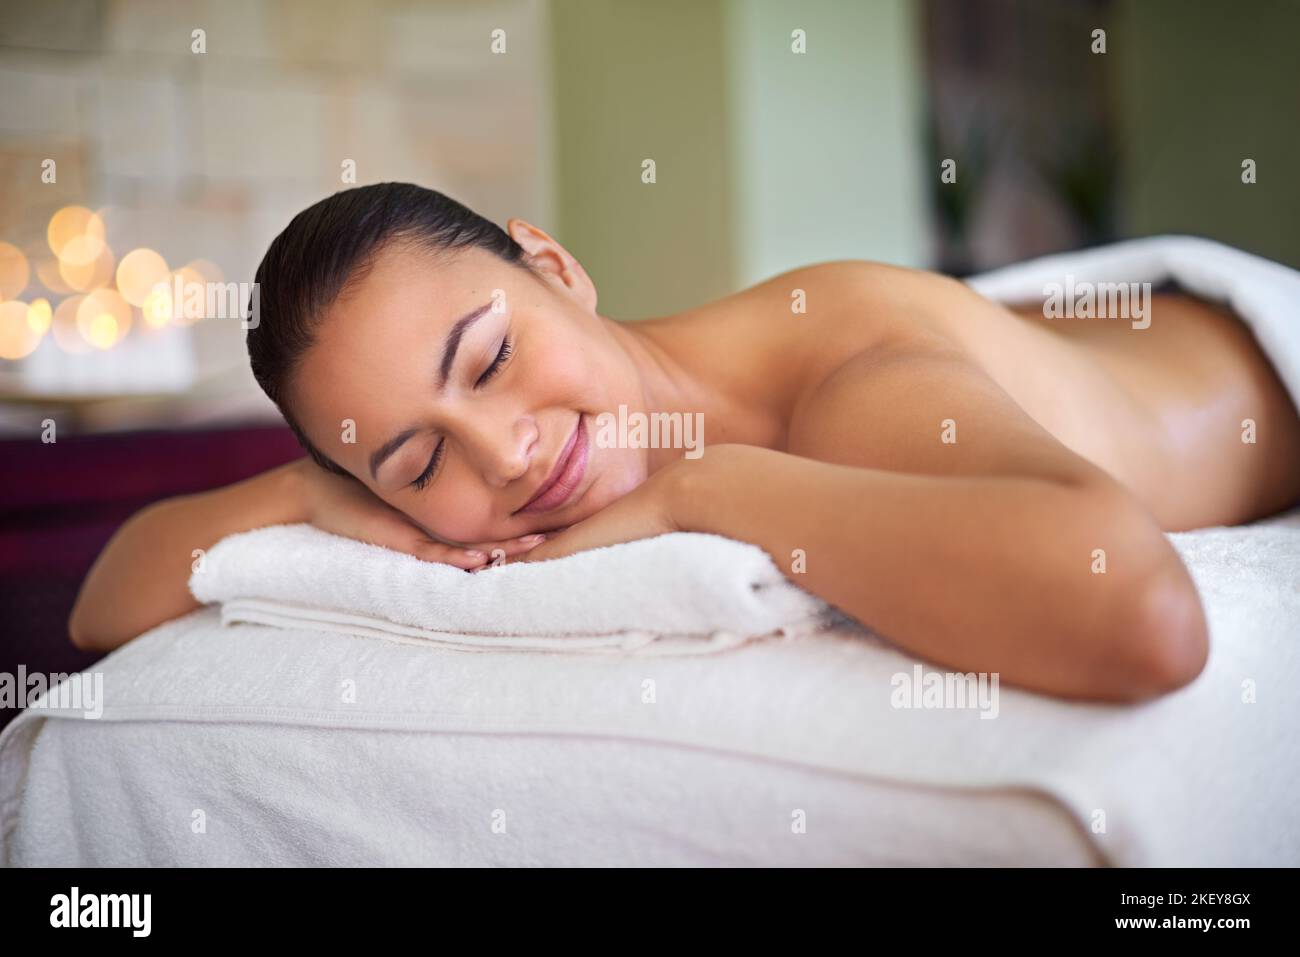 All you need is a day at the spa. an attractive woman enjoying a day at a health spa. Stock Photo